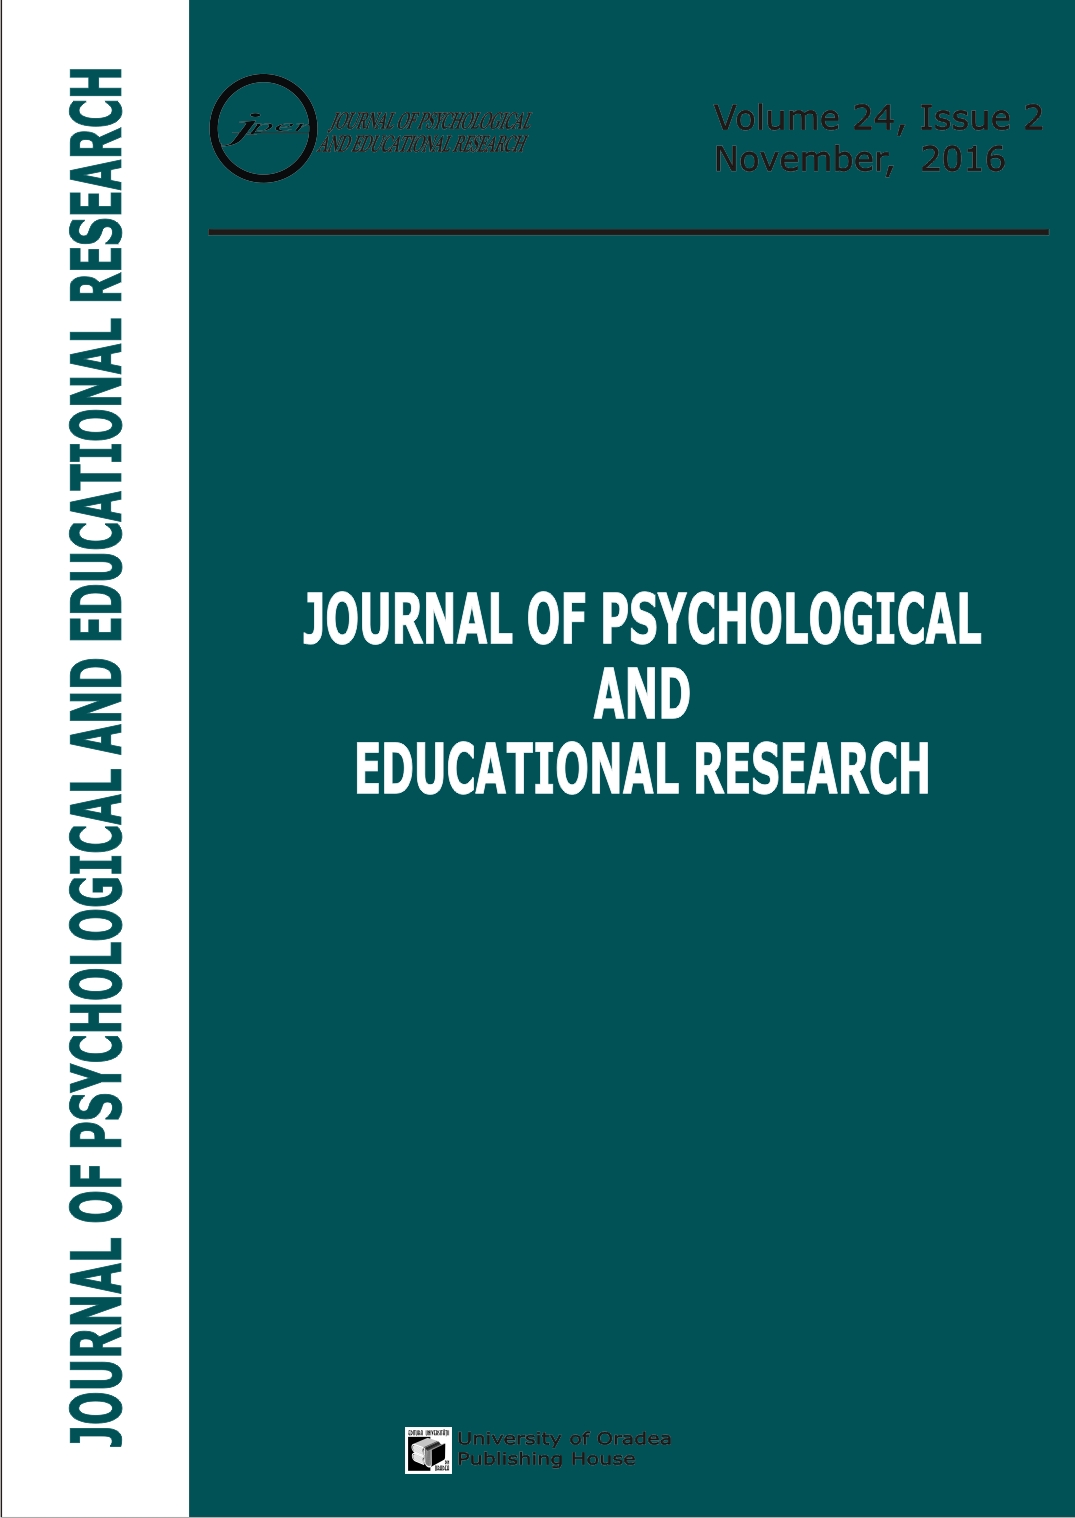 Self-worth, scholastic competence and approaches to learning in university students